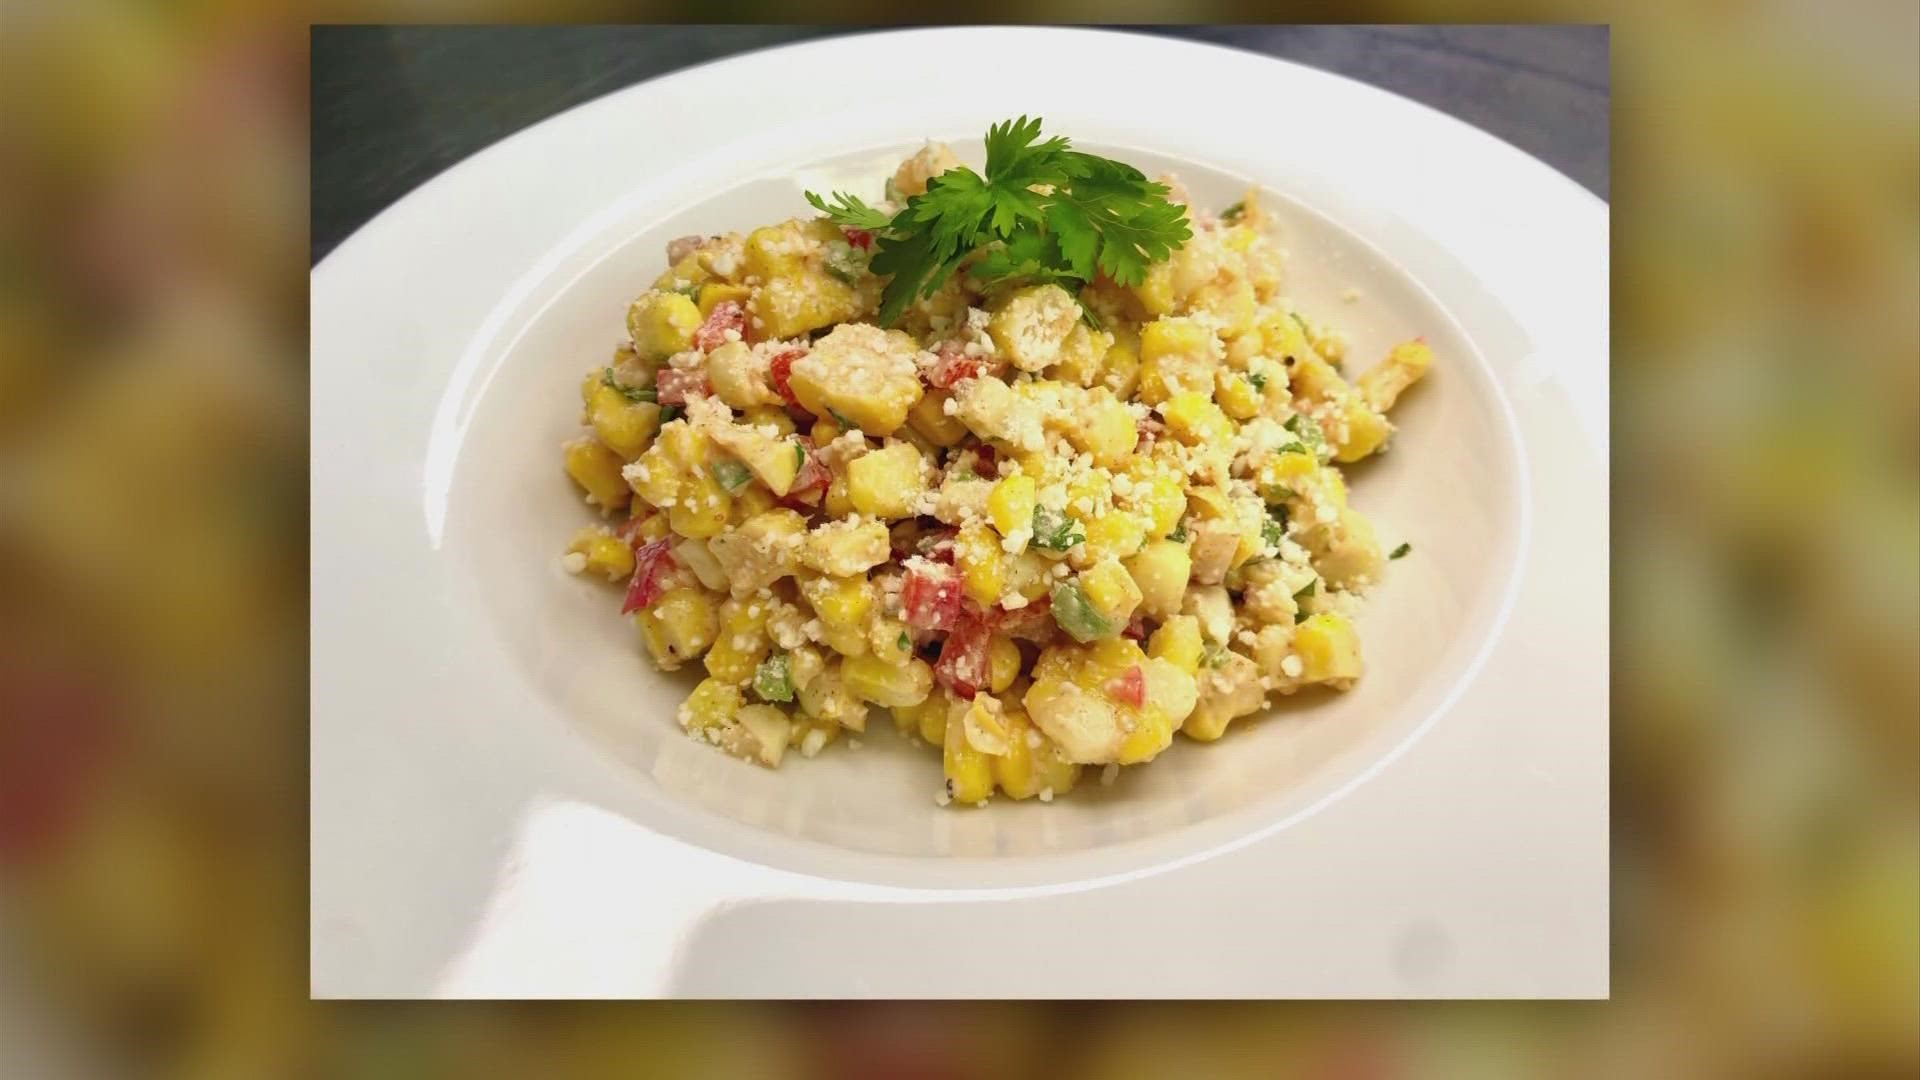 10TV's Brittany Bailey takes the corn off the cob and makes it the star of this delicious salad.